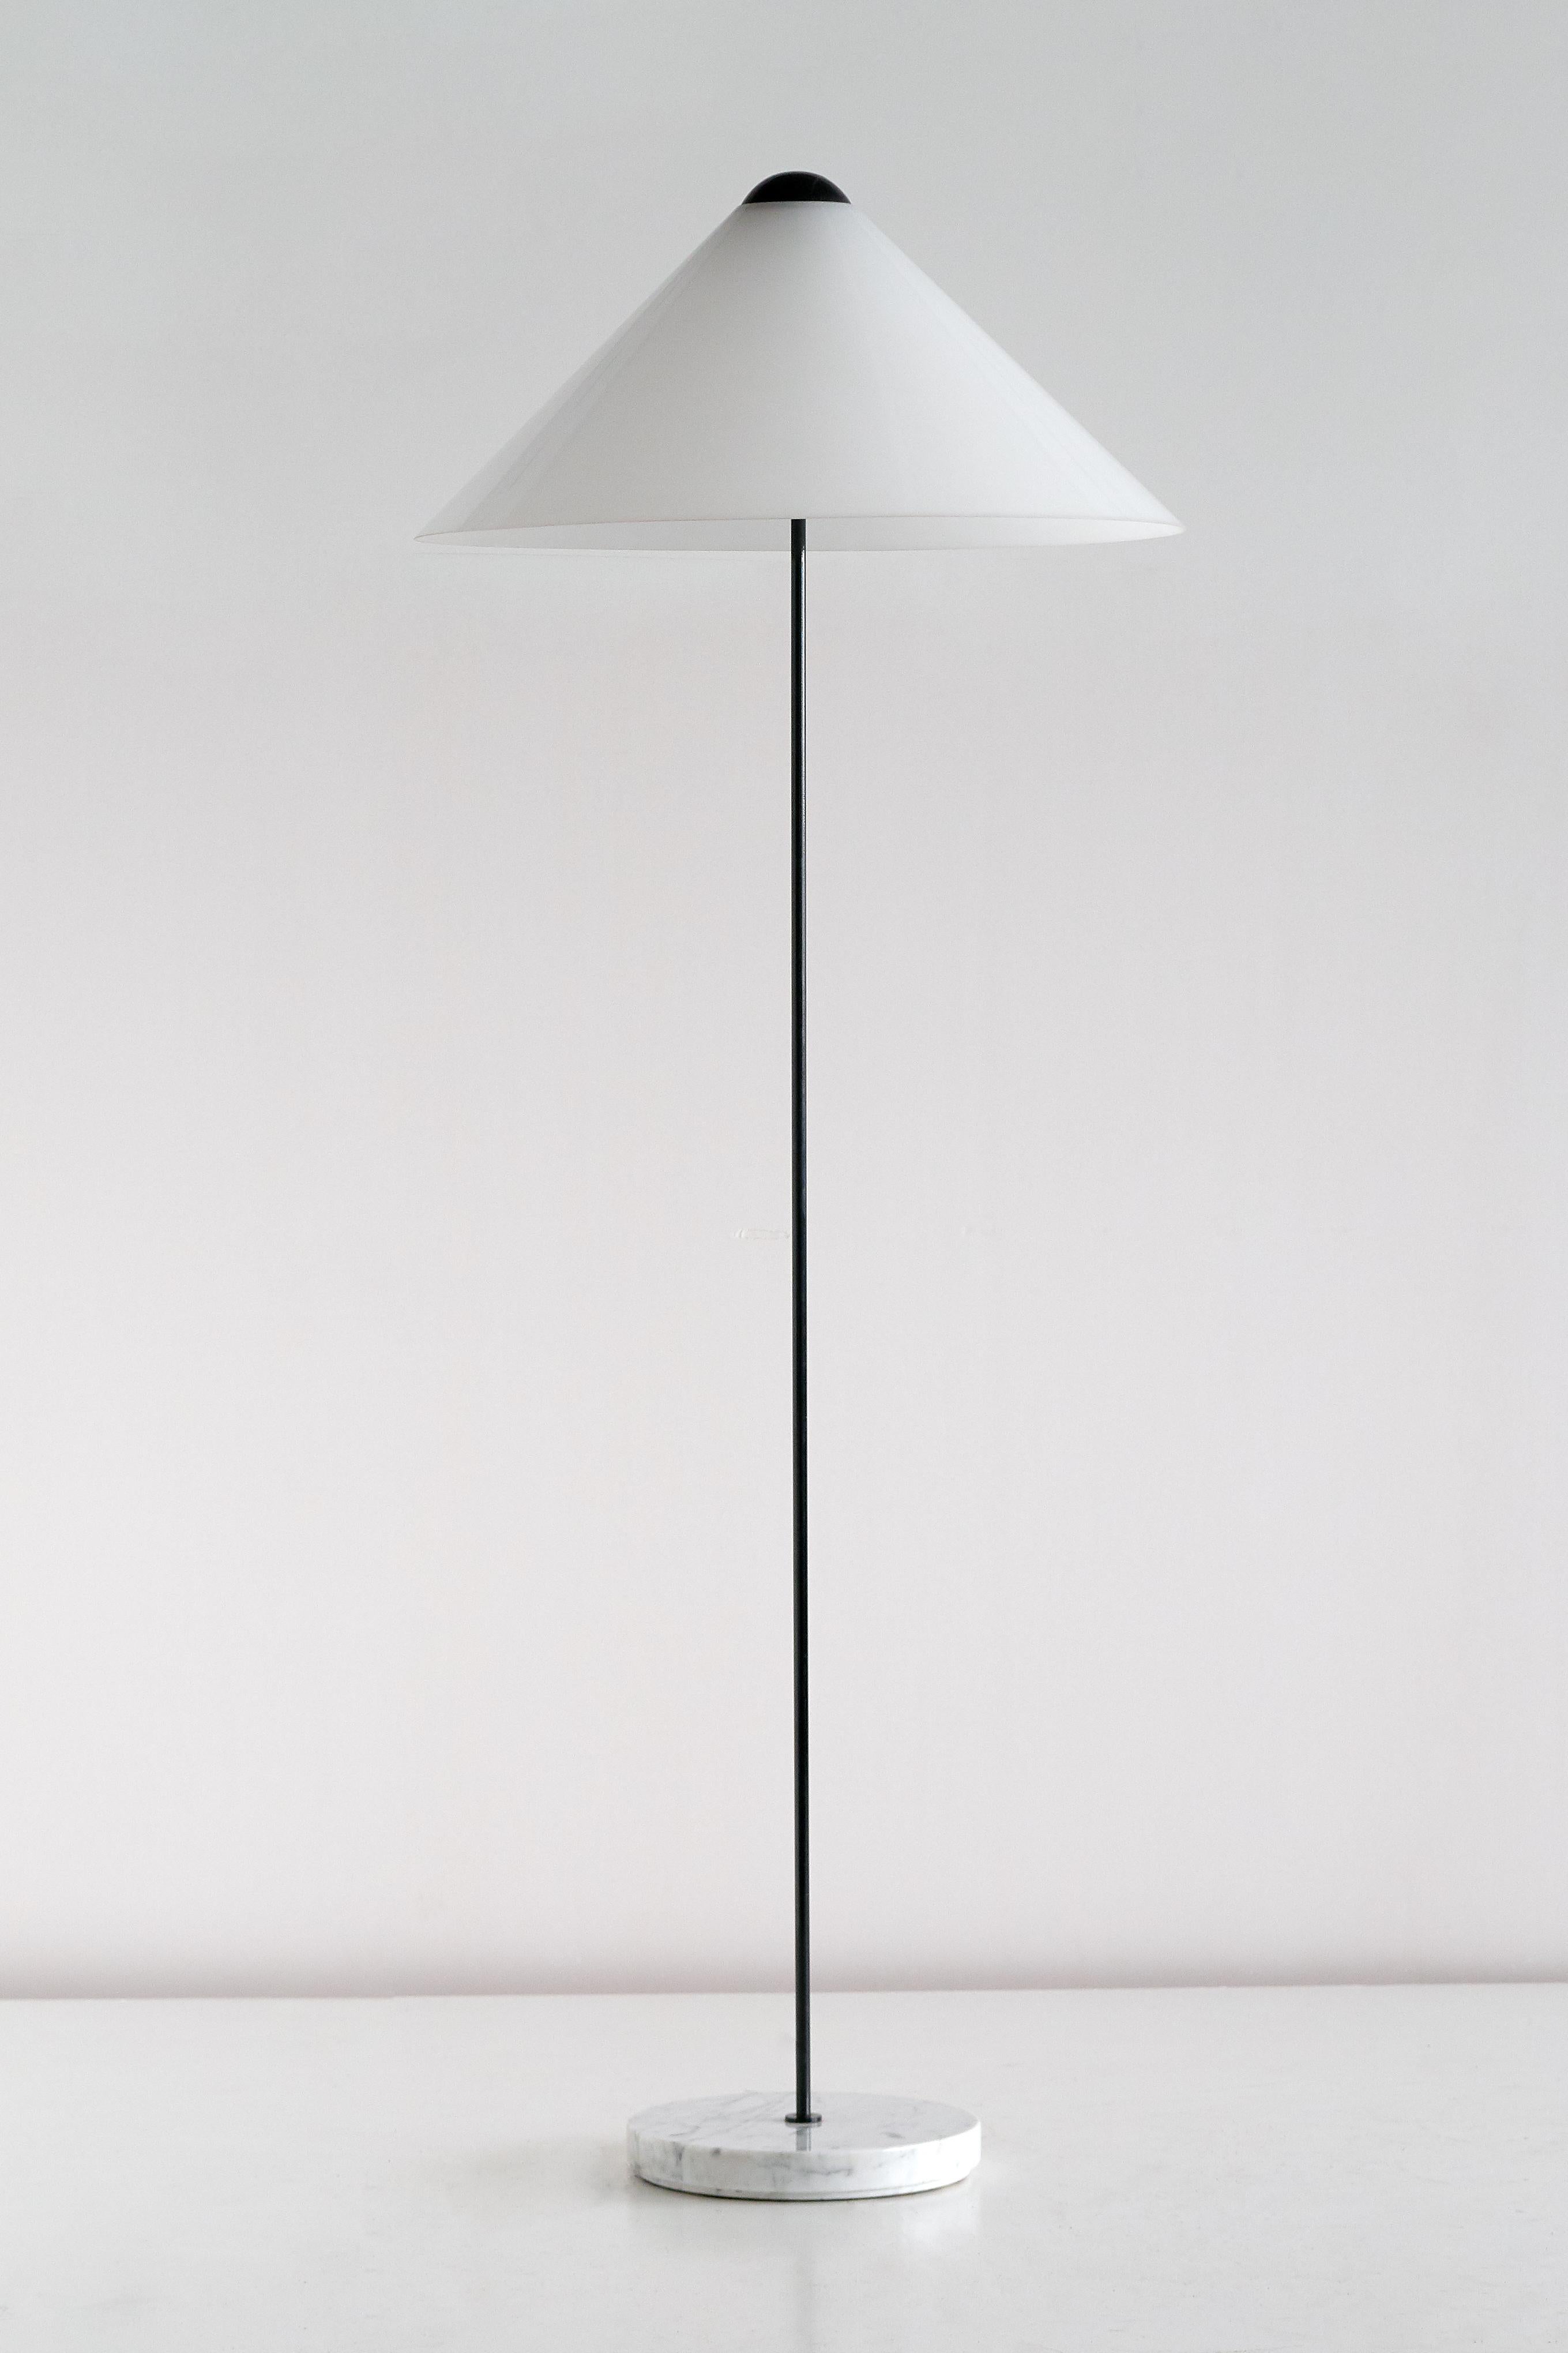 This rare floor lamp was designed by the iconic Vico Magistretti in 1973 and produced by the manufacturer O-Luce in Italy. The floor lamp is from the ‘Snow’ series and was only in production for a short period. The lamp has a translucent white